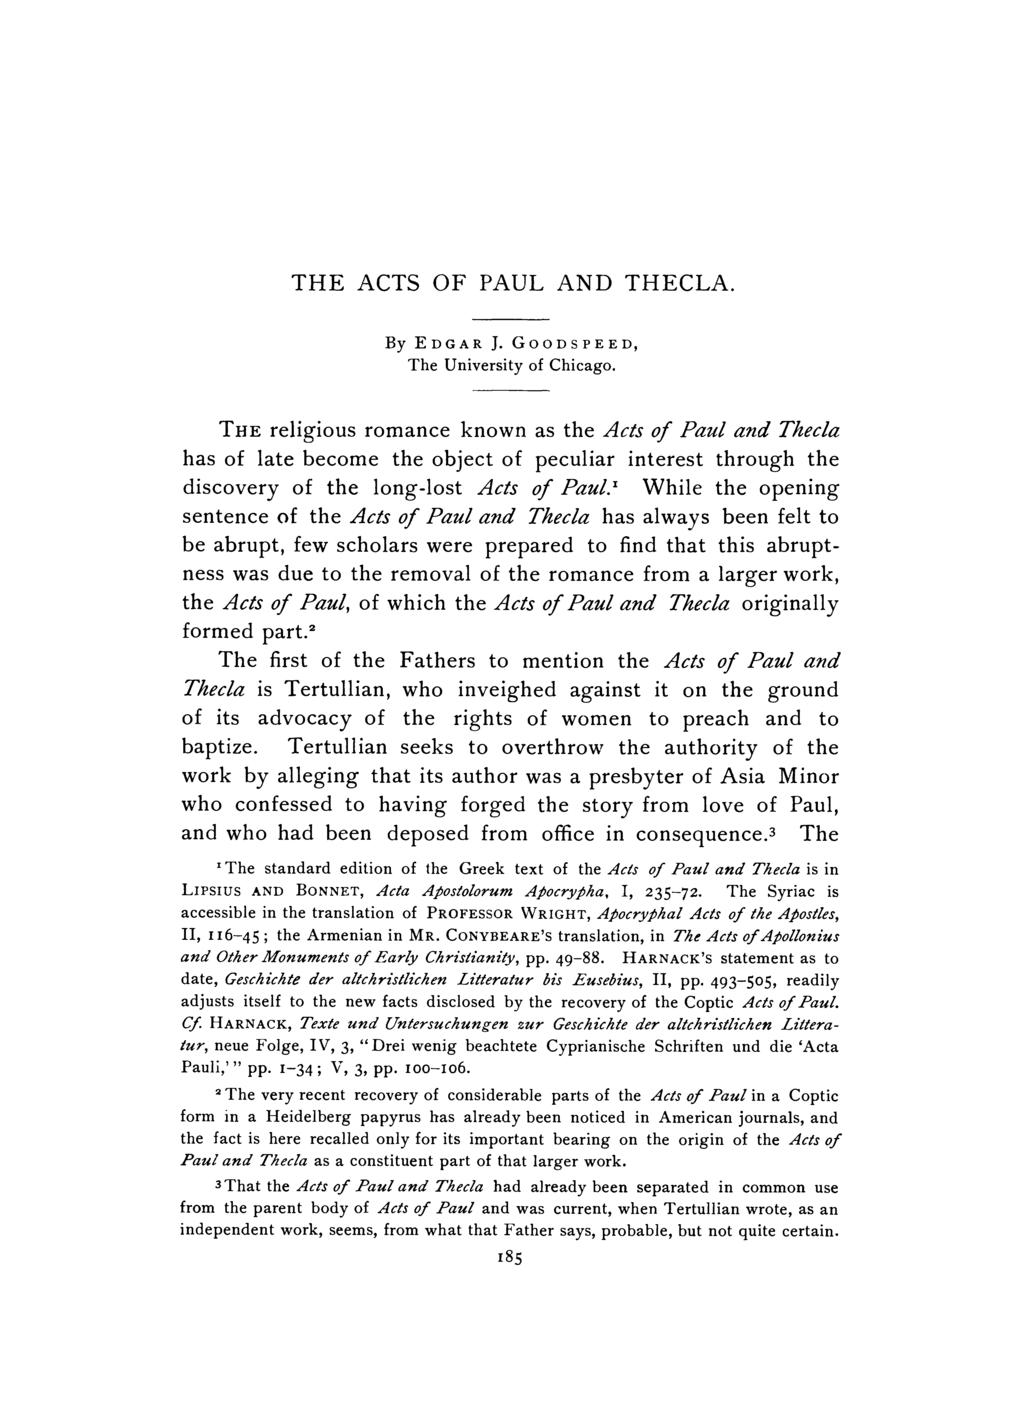 THE ACTS OF PAUL AND THECLA. By EDGAR J. GOODSPEED, The University of Chicago.